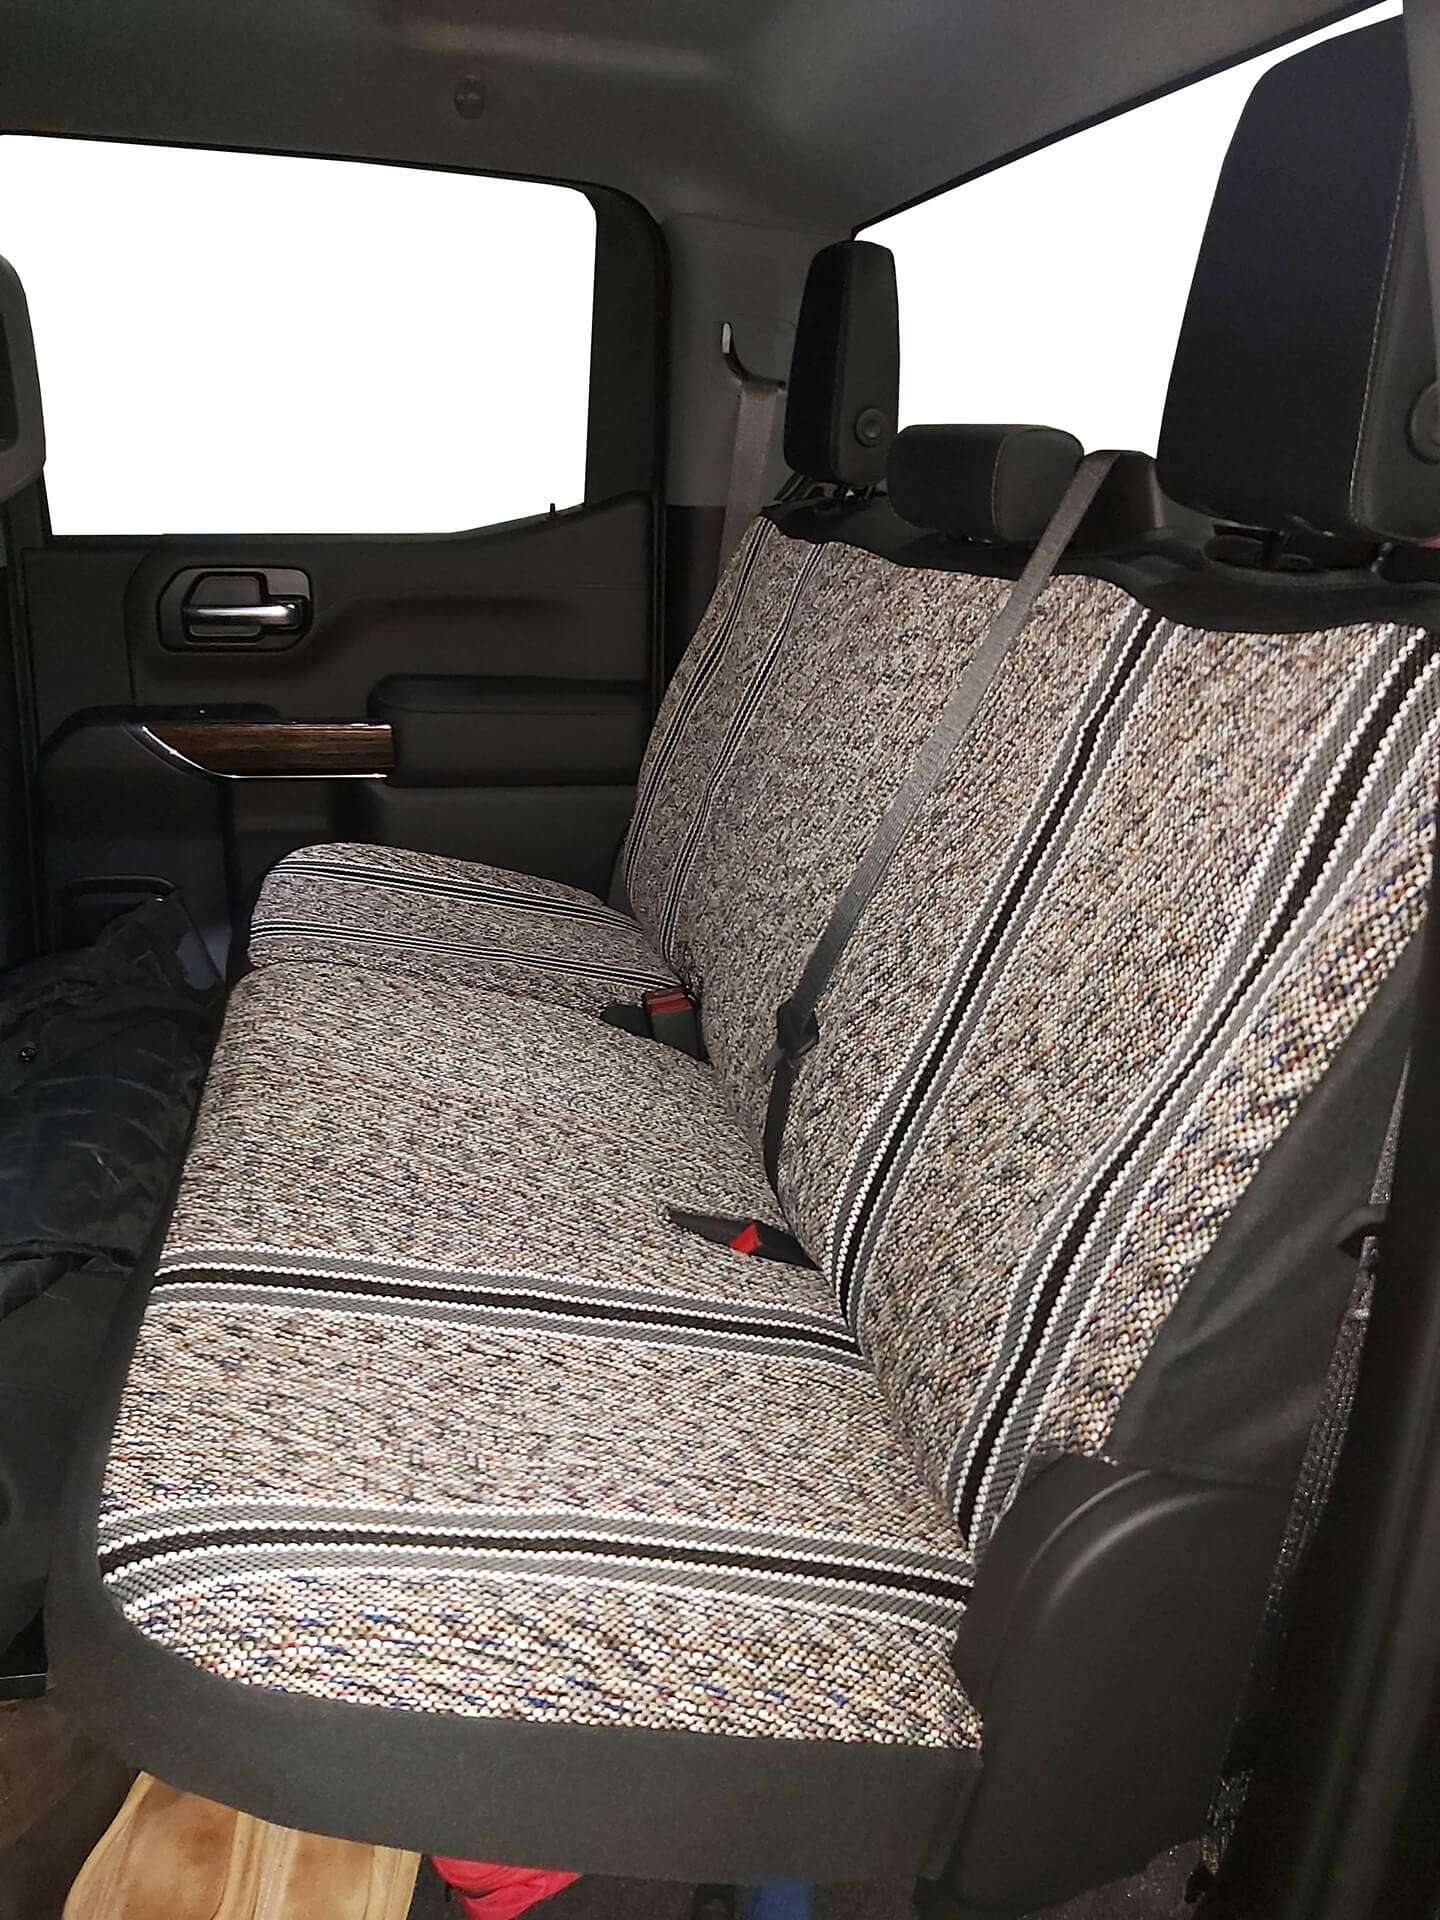 Chevy Silverado Truck Seat Covers Western Automotive Supplies - 2021 Silverado Truck Seat Covers